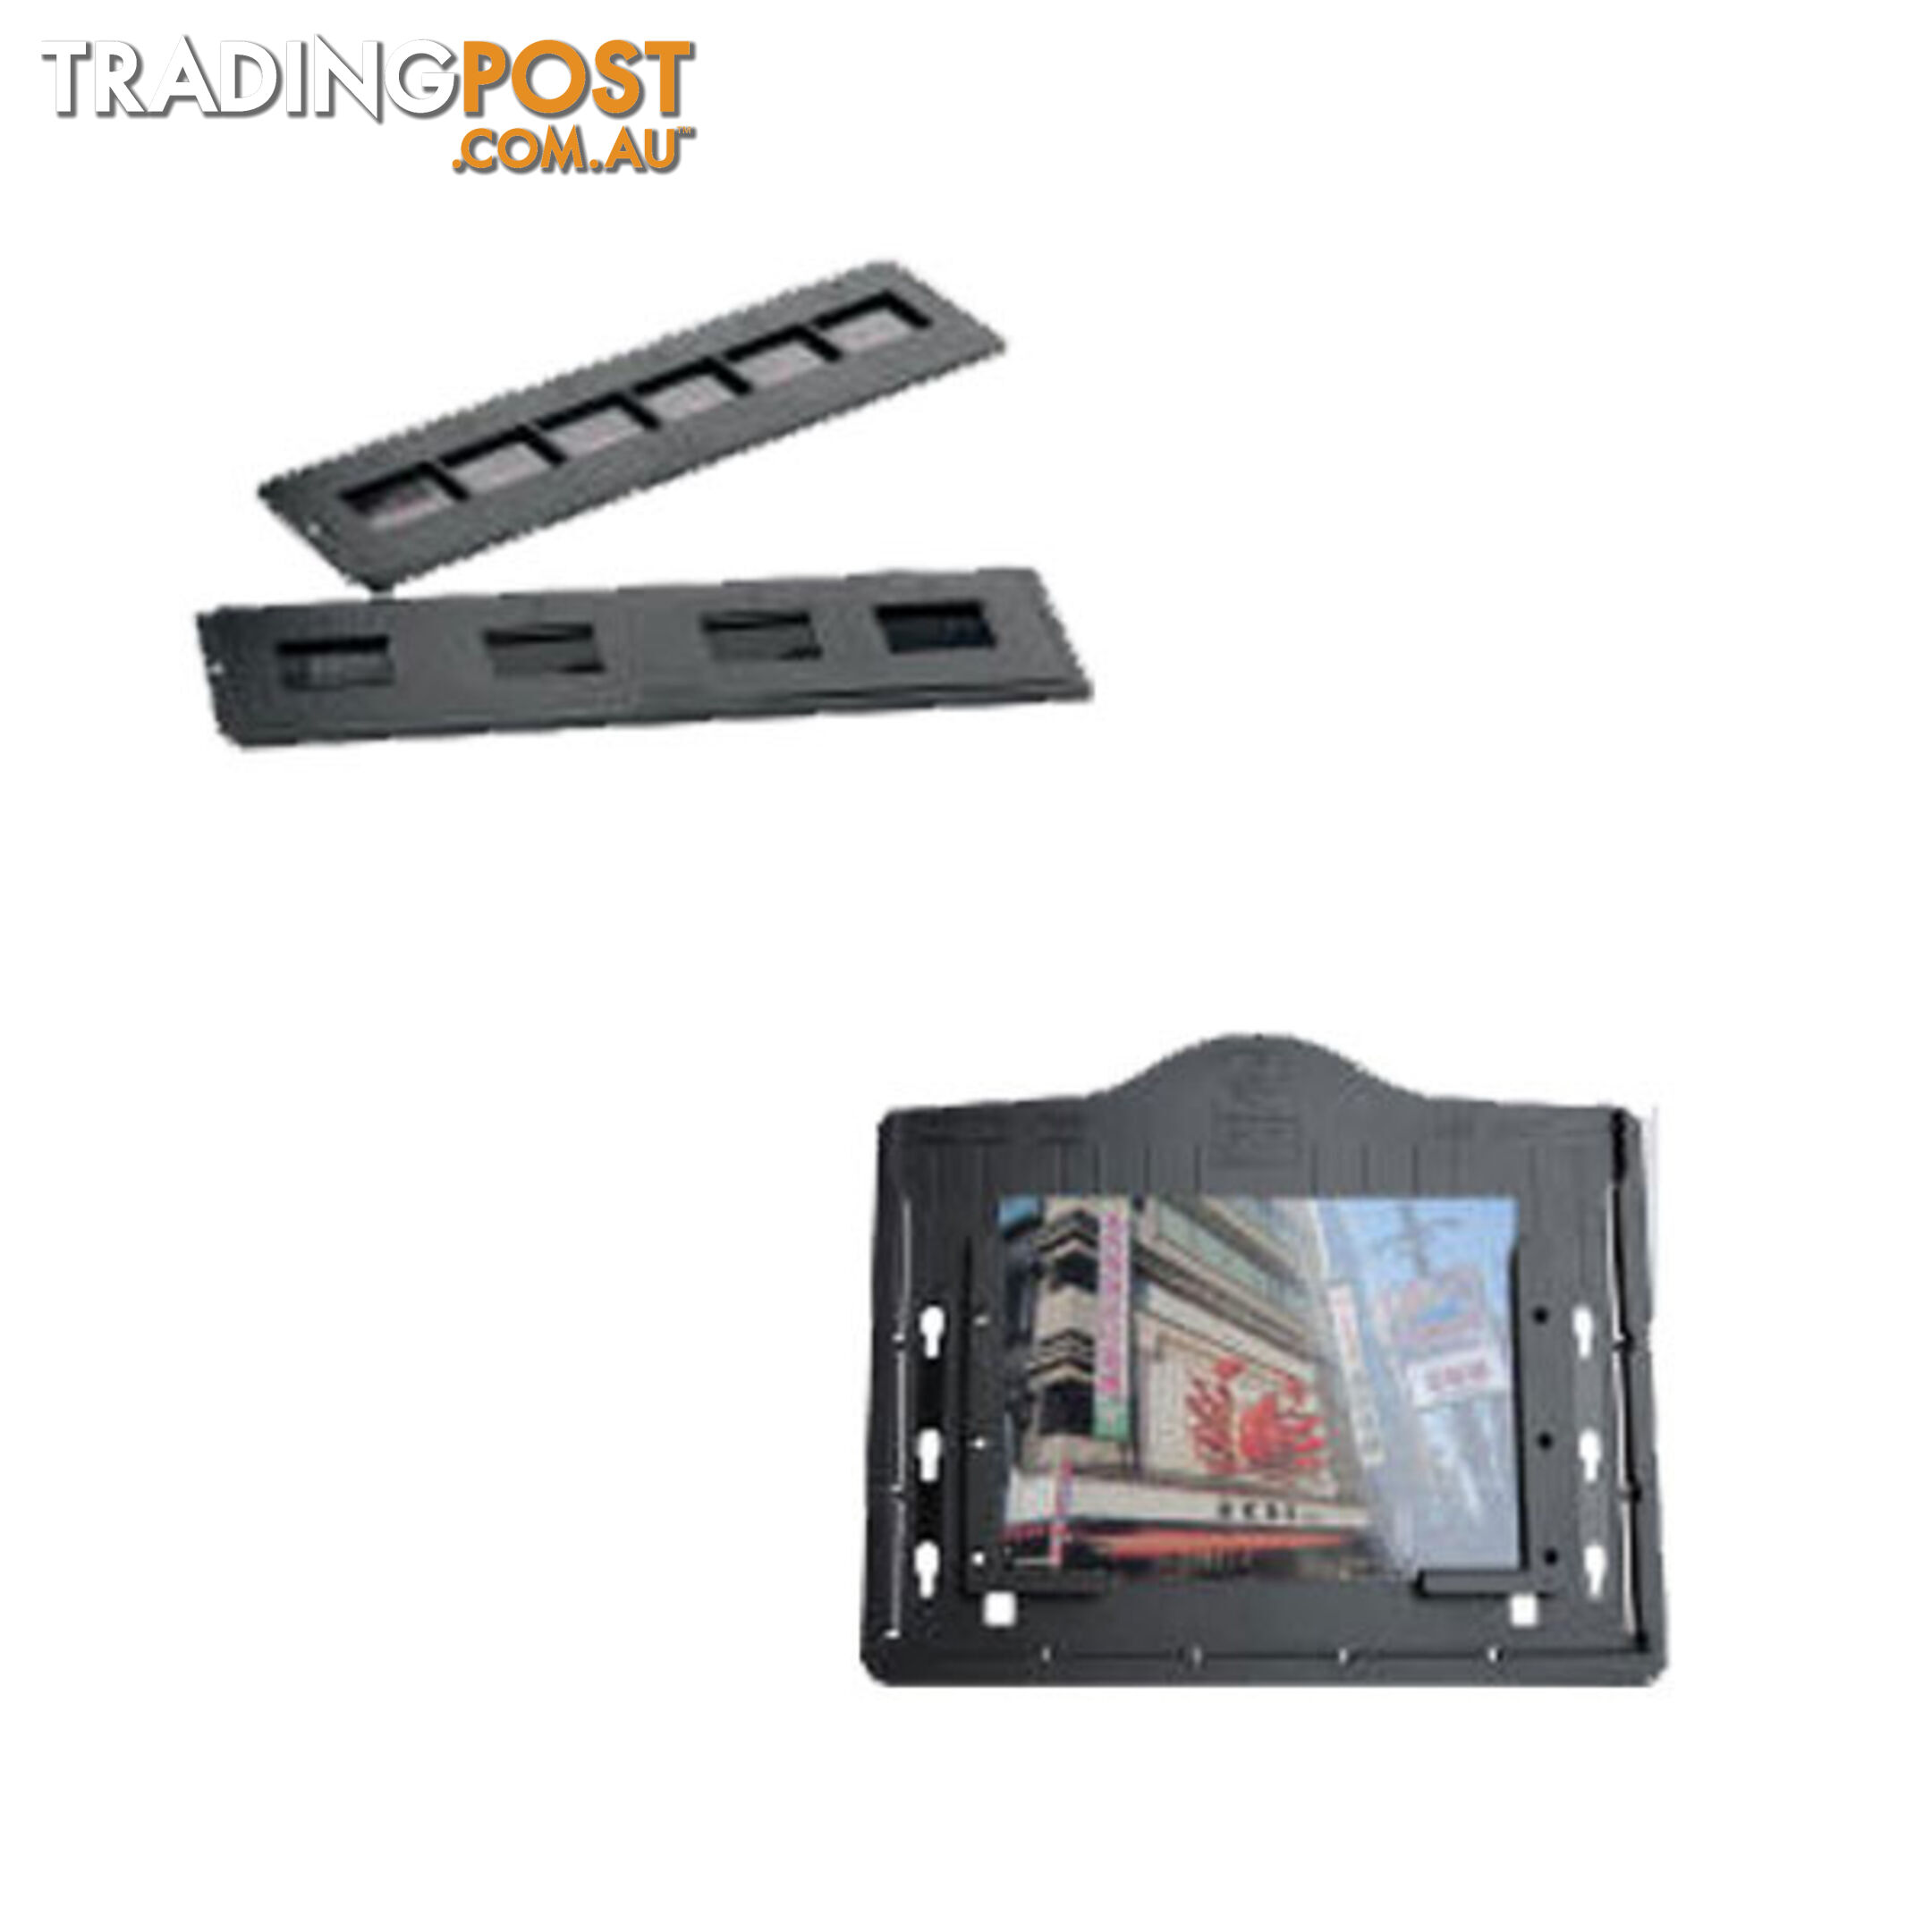 4-IN-1 Combo 14MP Photo/Film/Slide/Business card Scanner